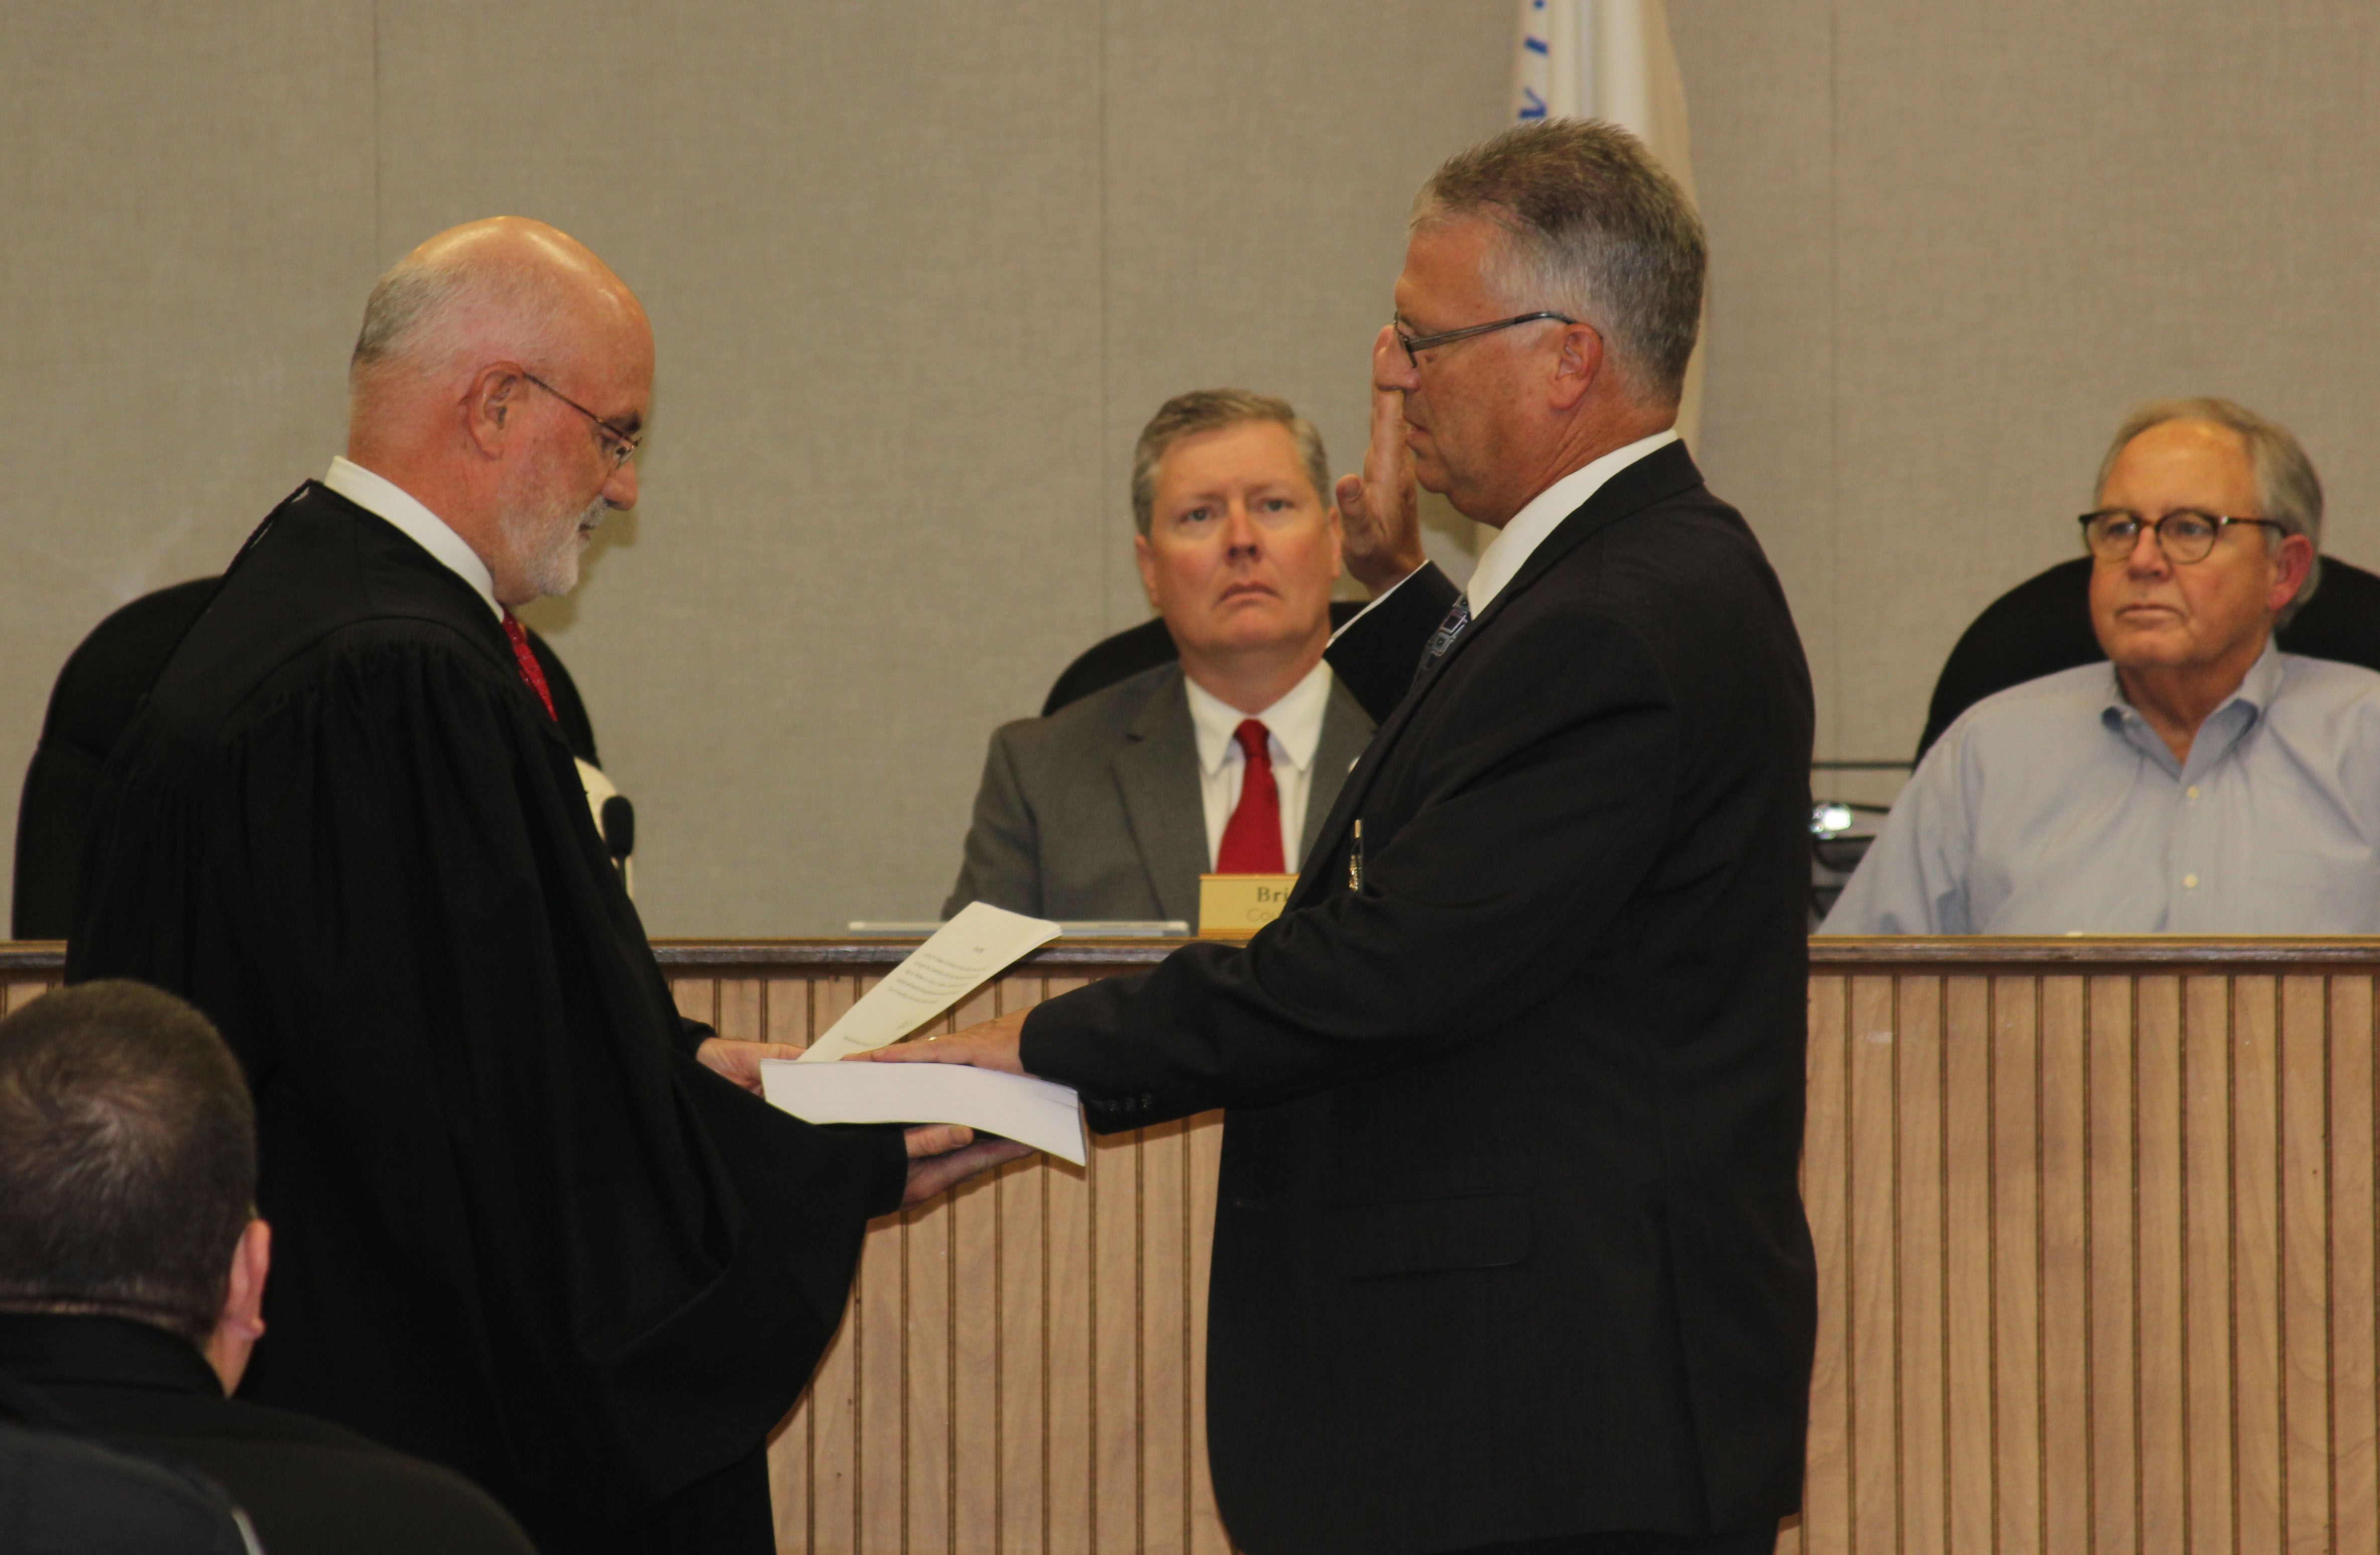 Trussville police chief sworn in during city council meeting